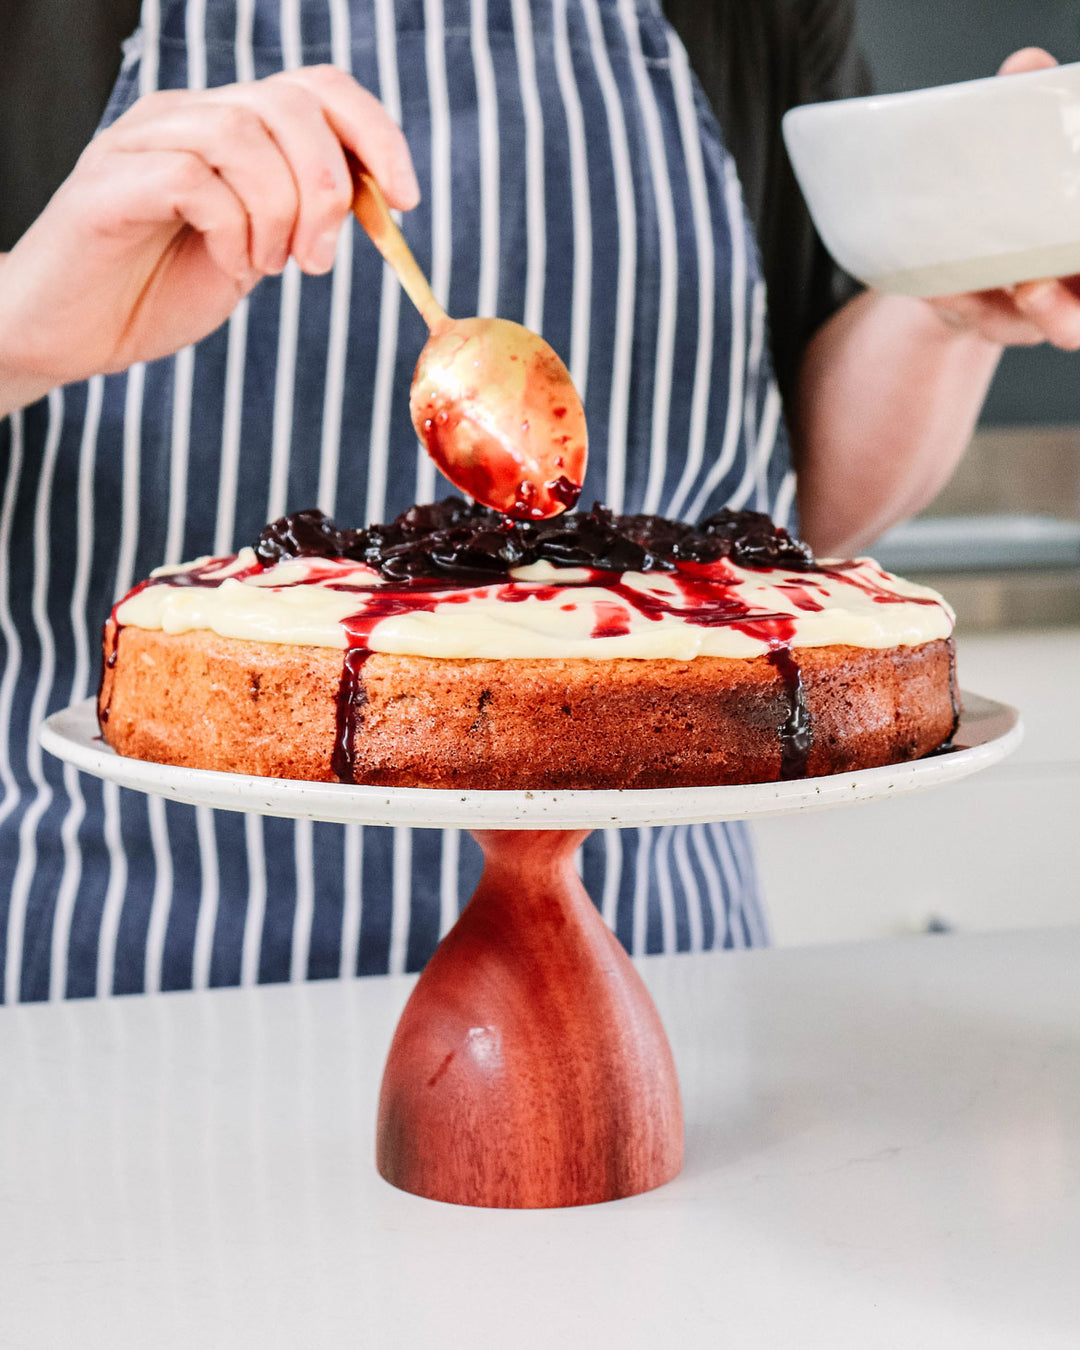 Lise Walsh decorating her tea cake with vanilla cream icing and cherry syrup on her Winterwares handmade cake stand